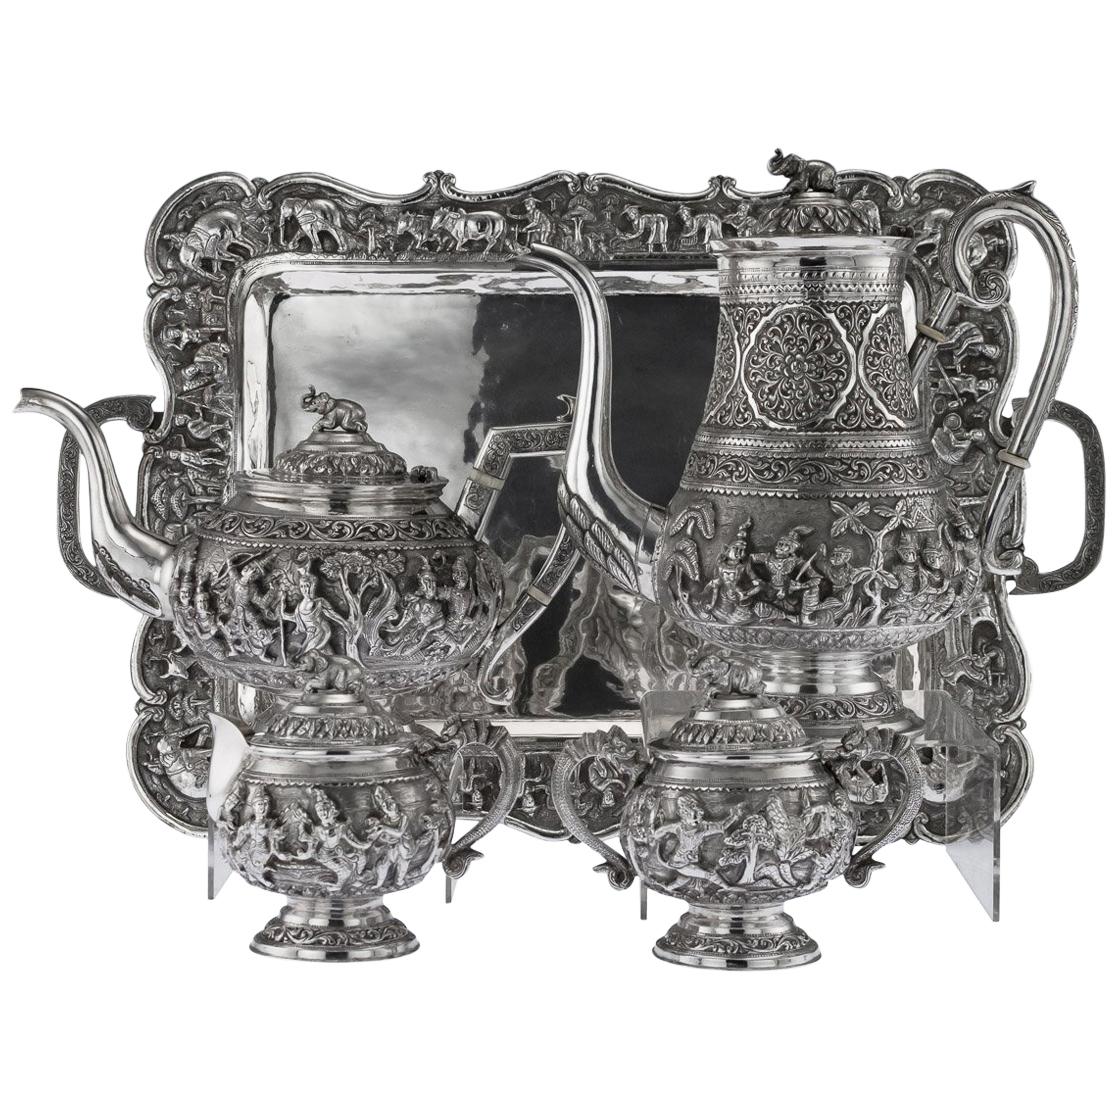 Antique 20th Century Burmese Solid Silver Tea and Coffee Set on Tray, circa 1920